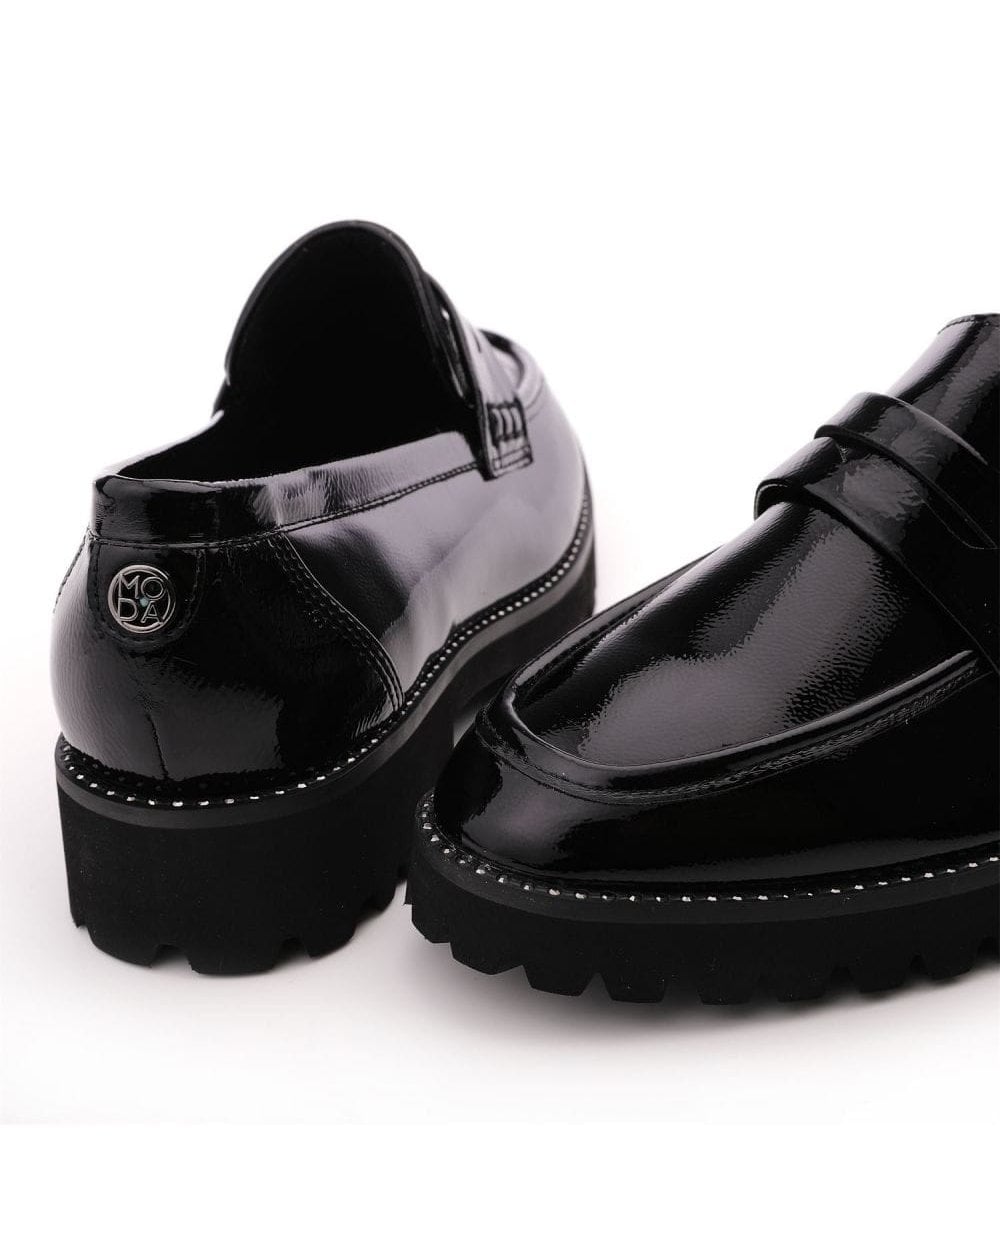 Calfie Leather Loafer